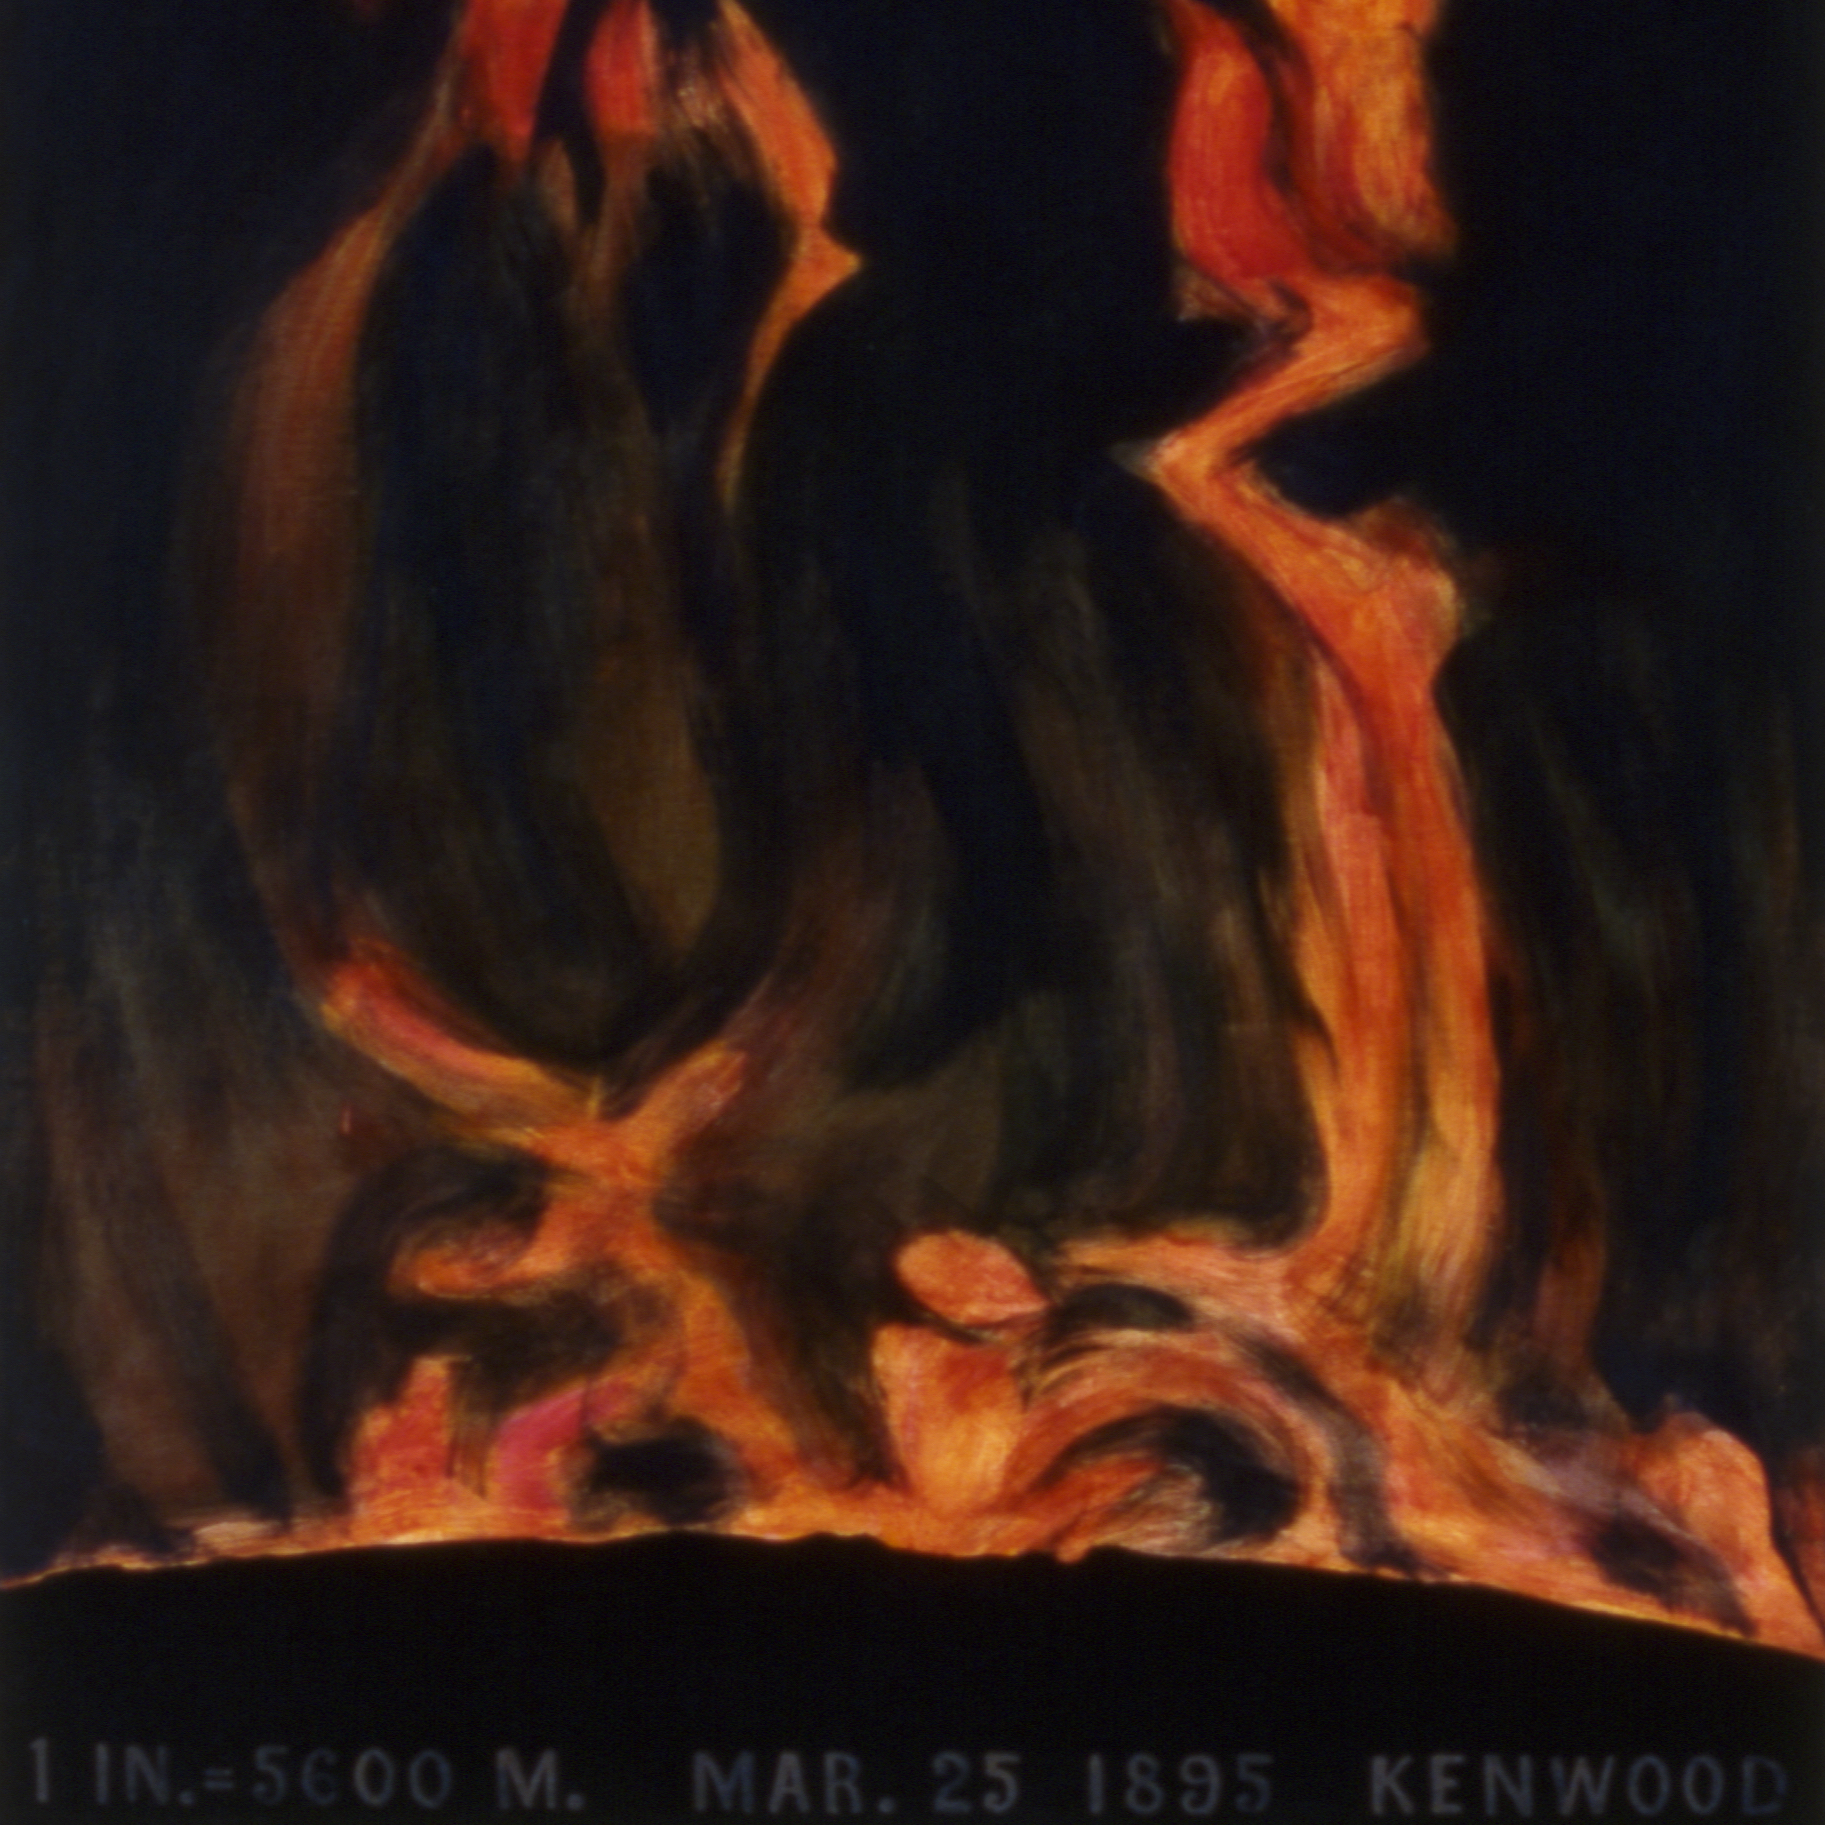 A painting of hydrogen prominences: a black background with red plumes of flame-like energy erupting from a curved surface.